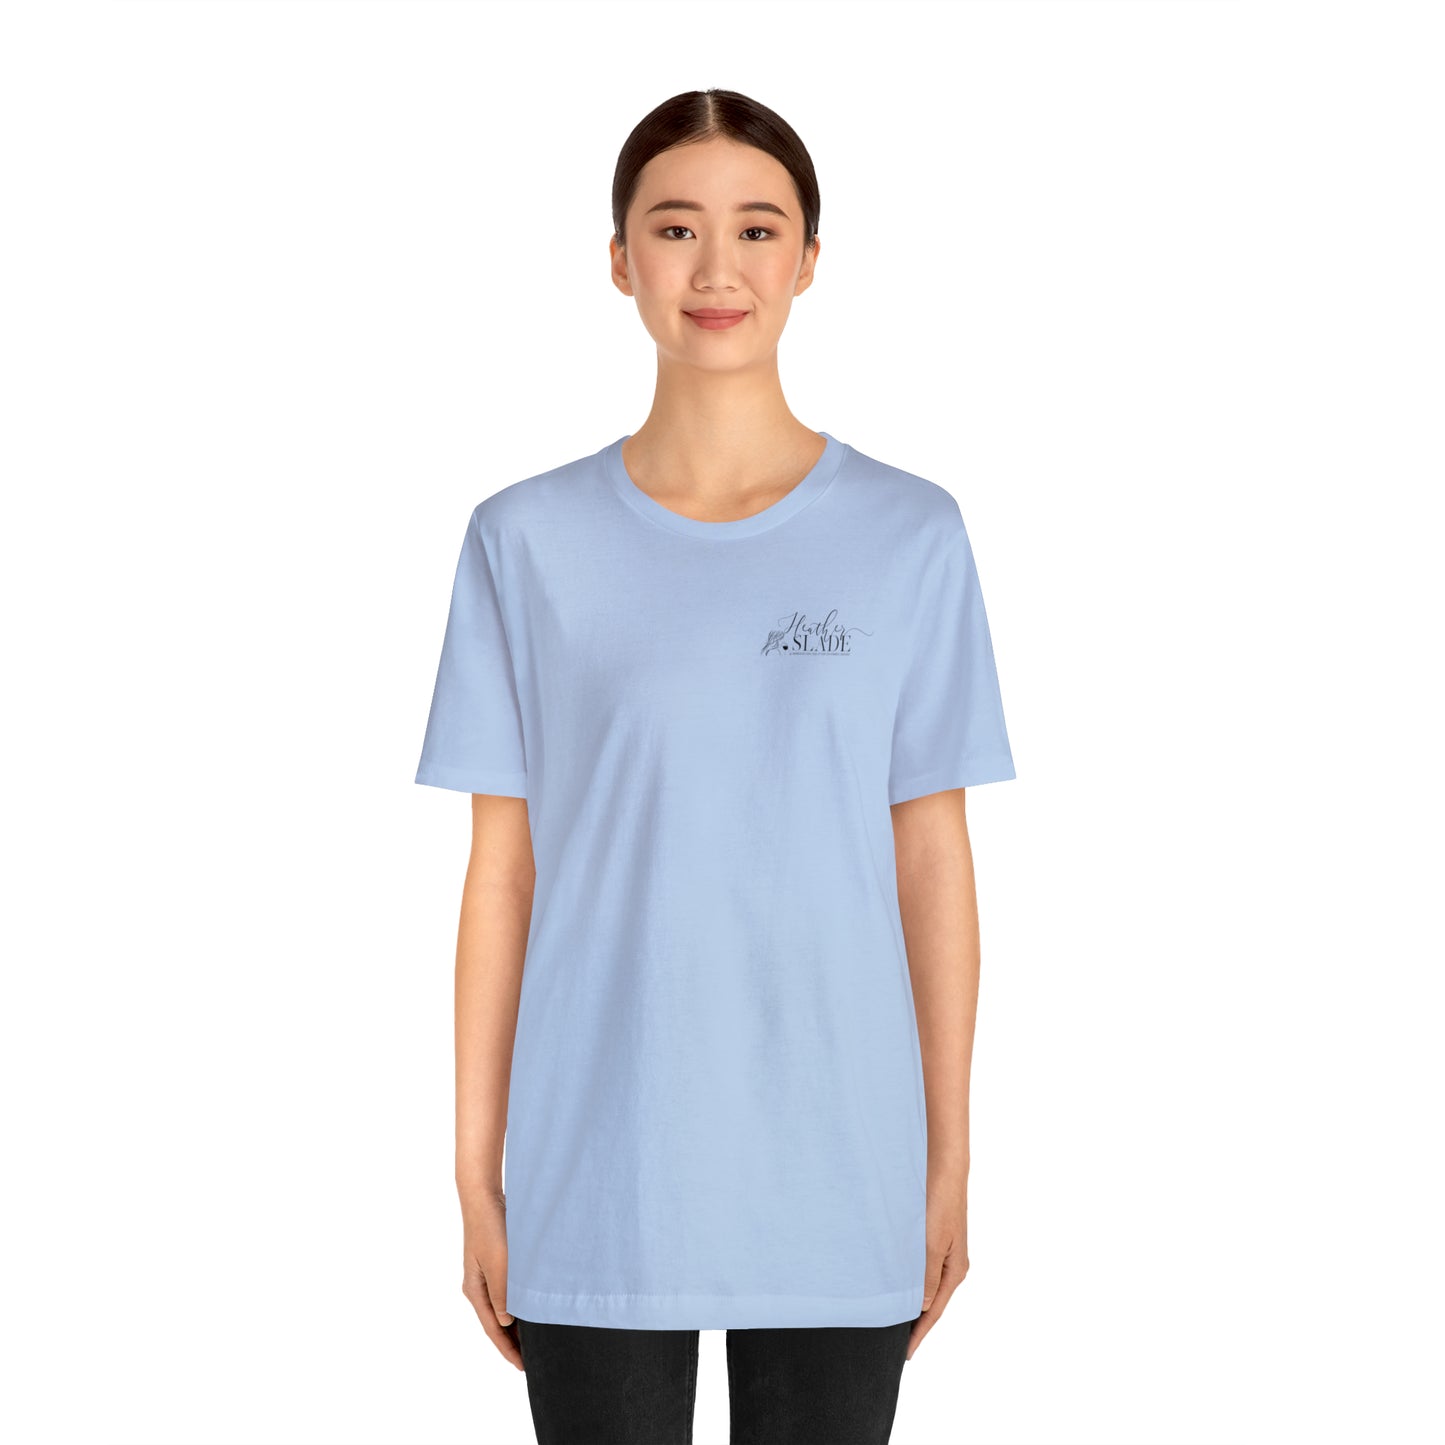 The Unstoppables Team One Jersey Short Sleeve Tee